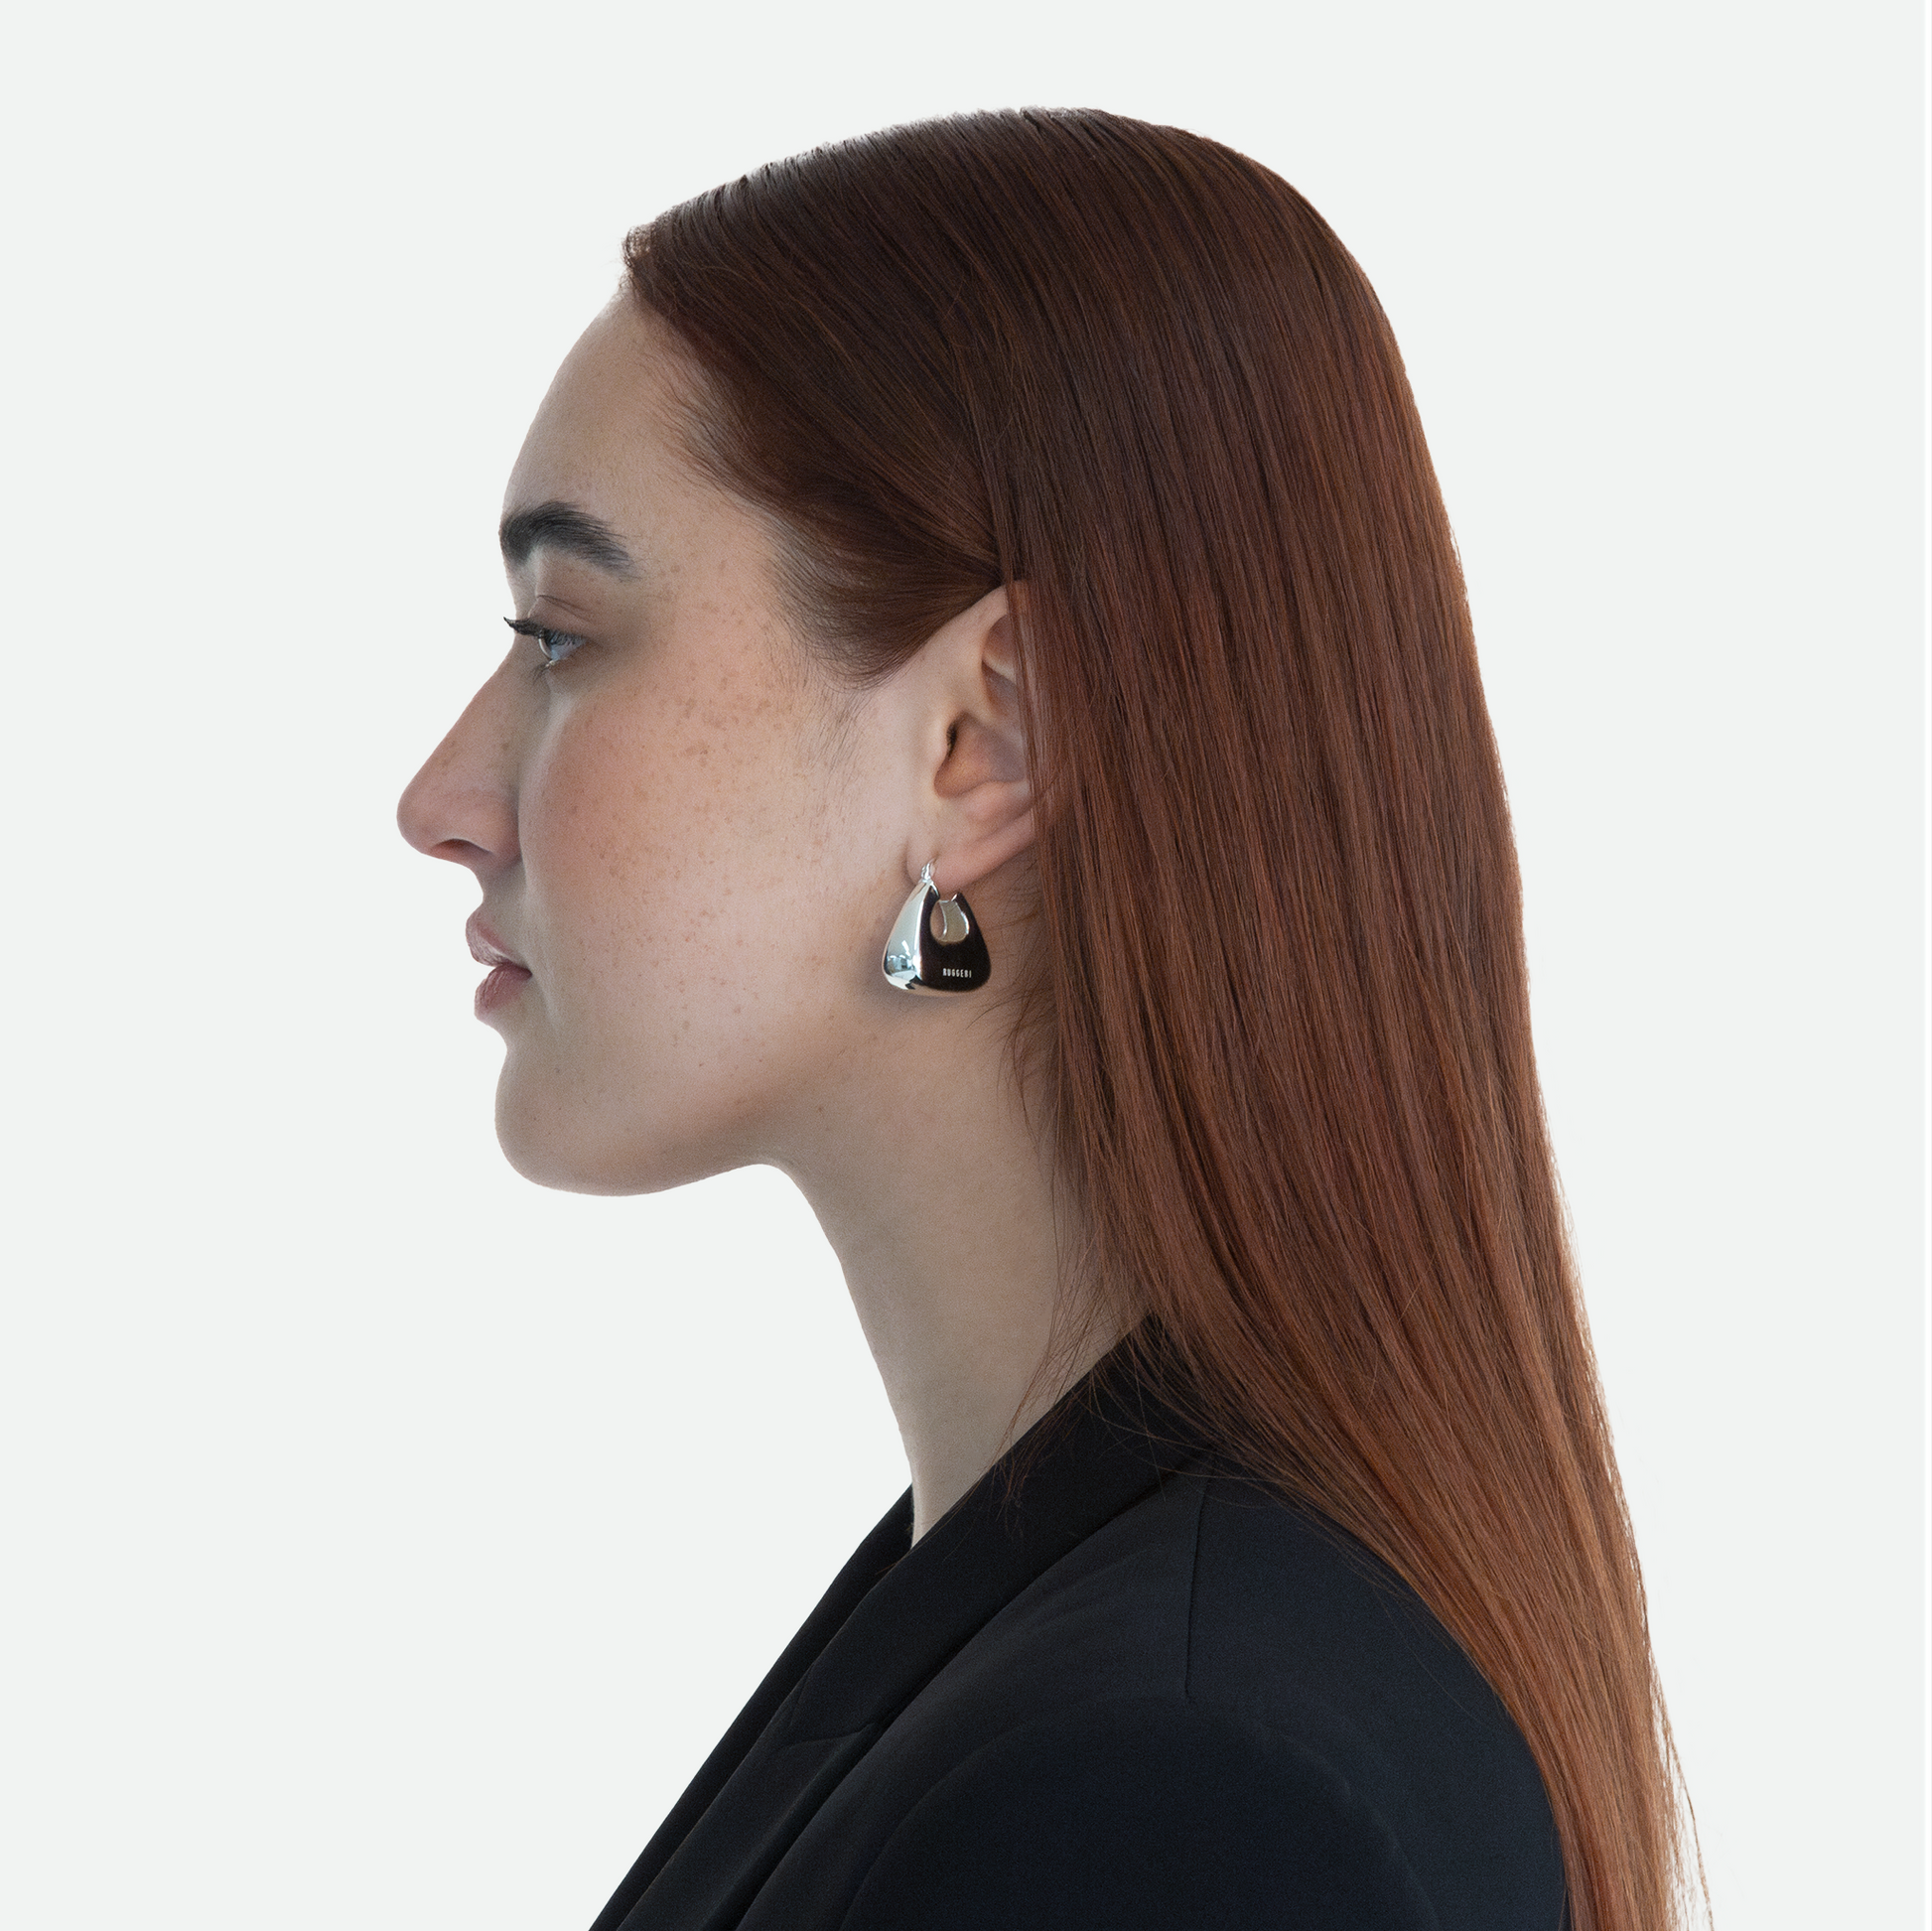 Side profile view of model wearing Ruggeri's silver Pouch earrings with etched logo.